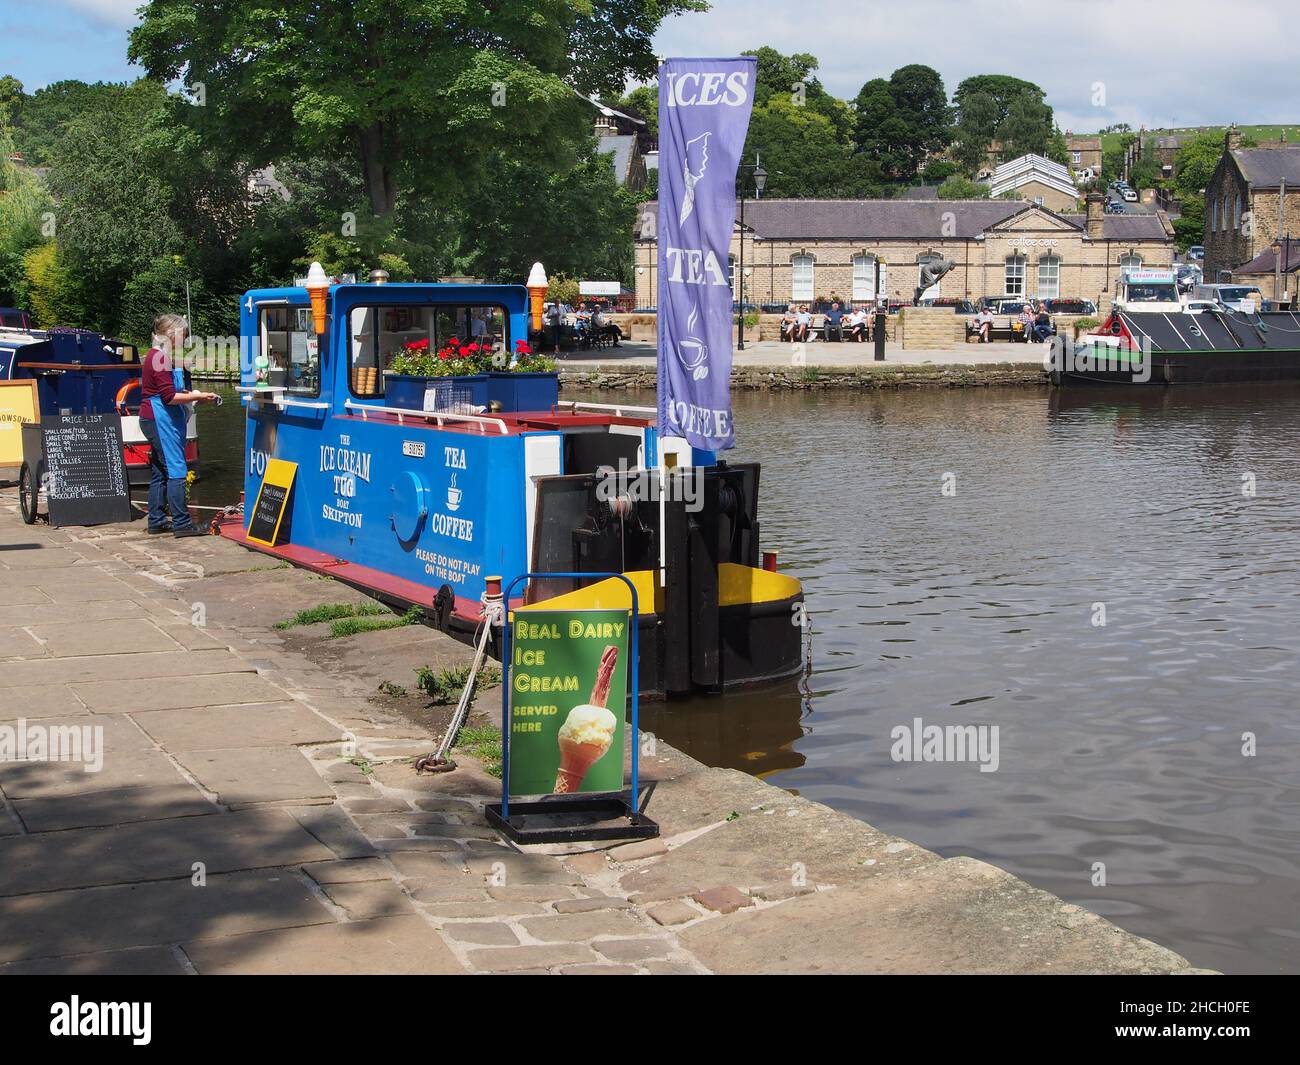 The ice cream boat with a female customer in the sunshine at the canal basin on the Leeds and Liverpool canal in Skipton, North Yorkshire, England. Stock Photo